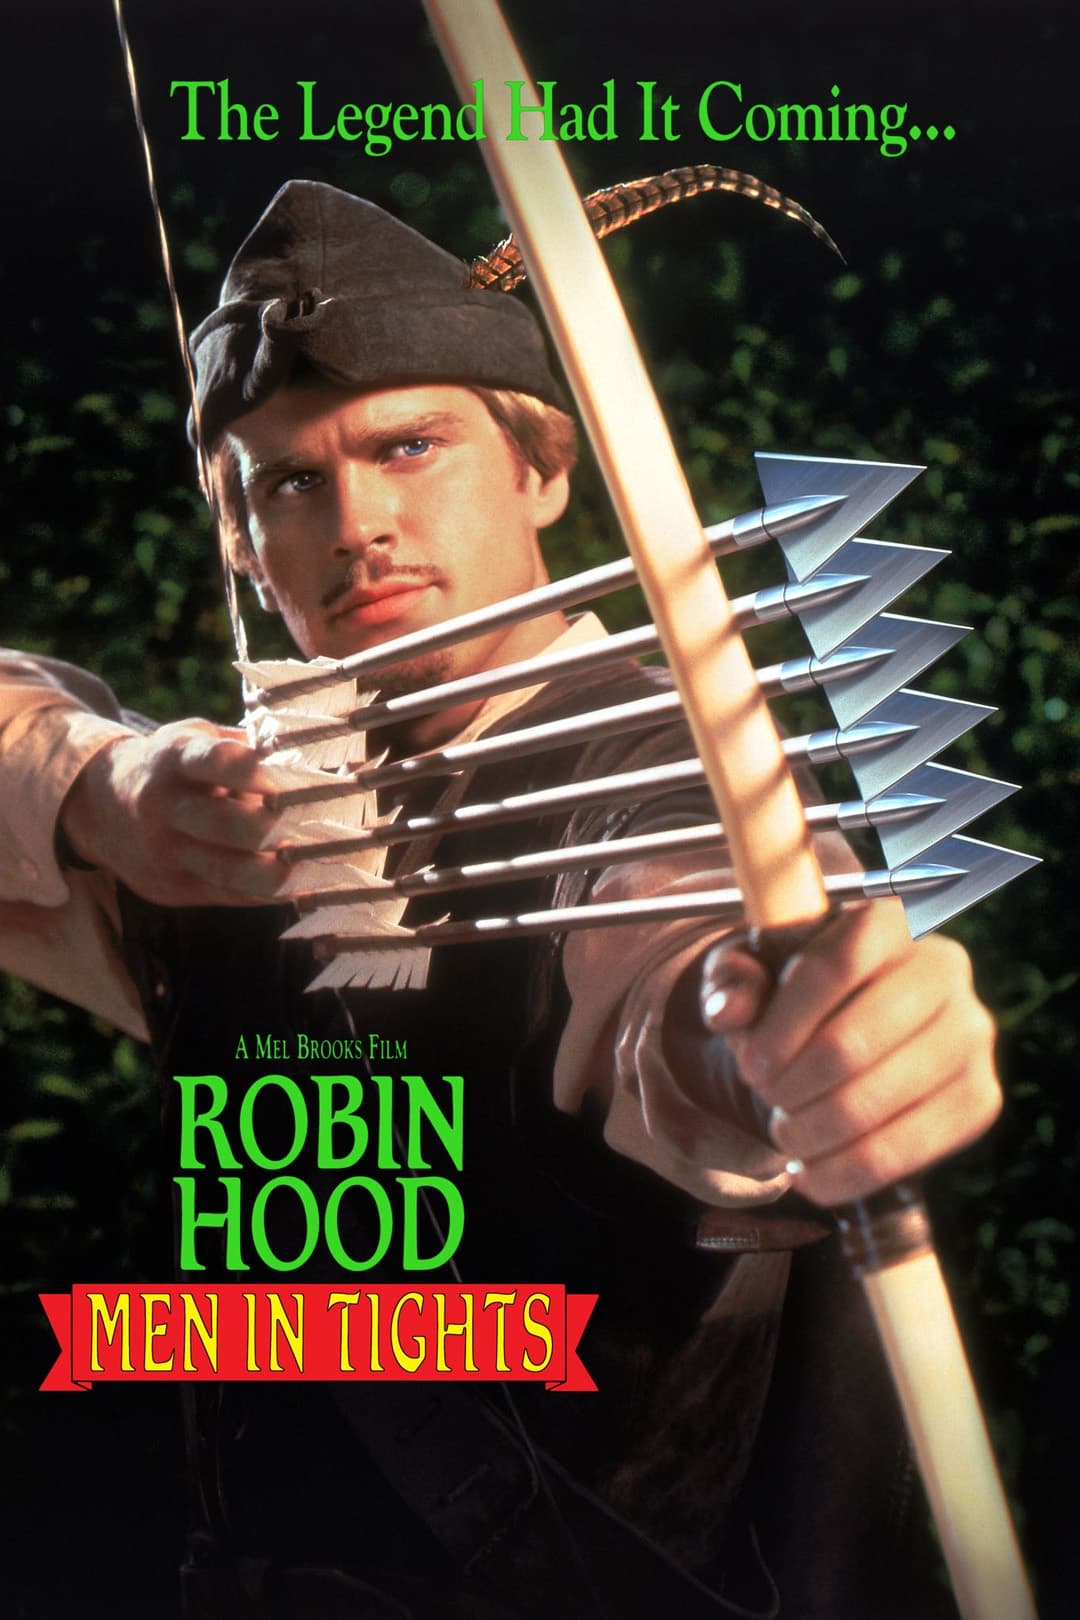 Robin Hood: Men In Tights - The Legend Had It Coming (1993)